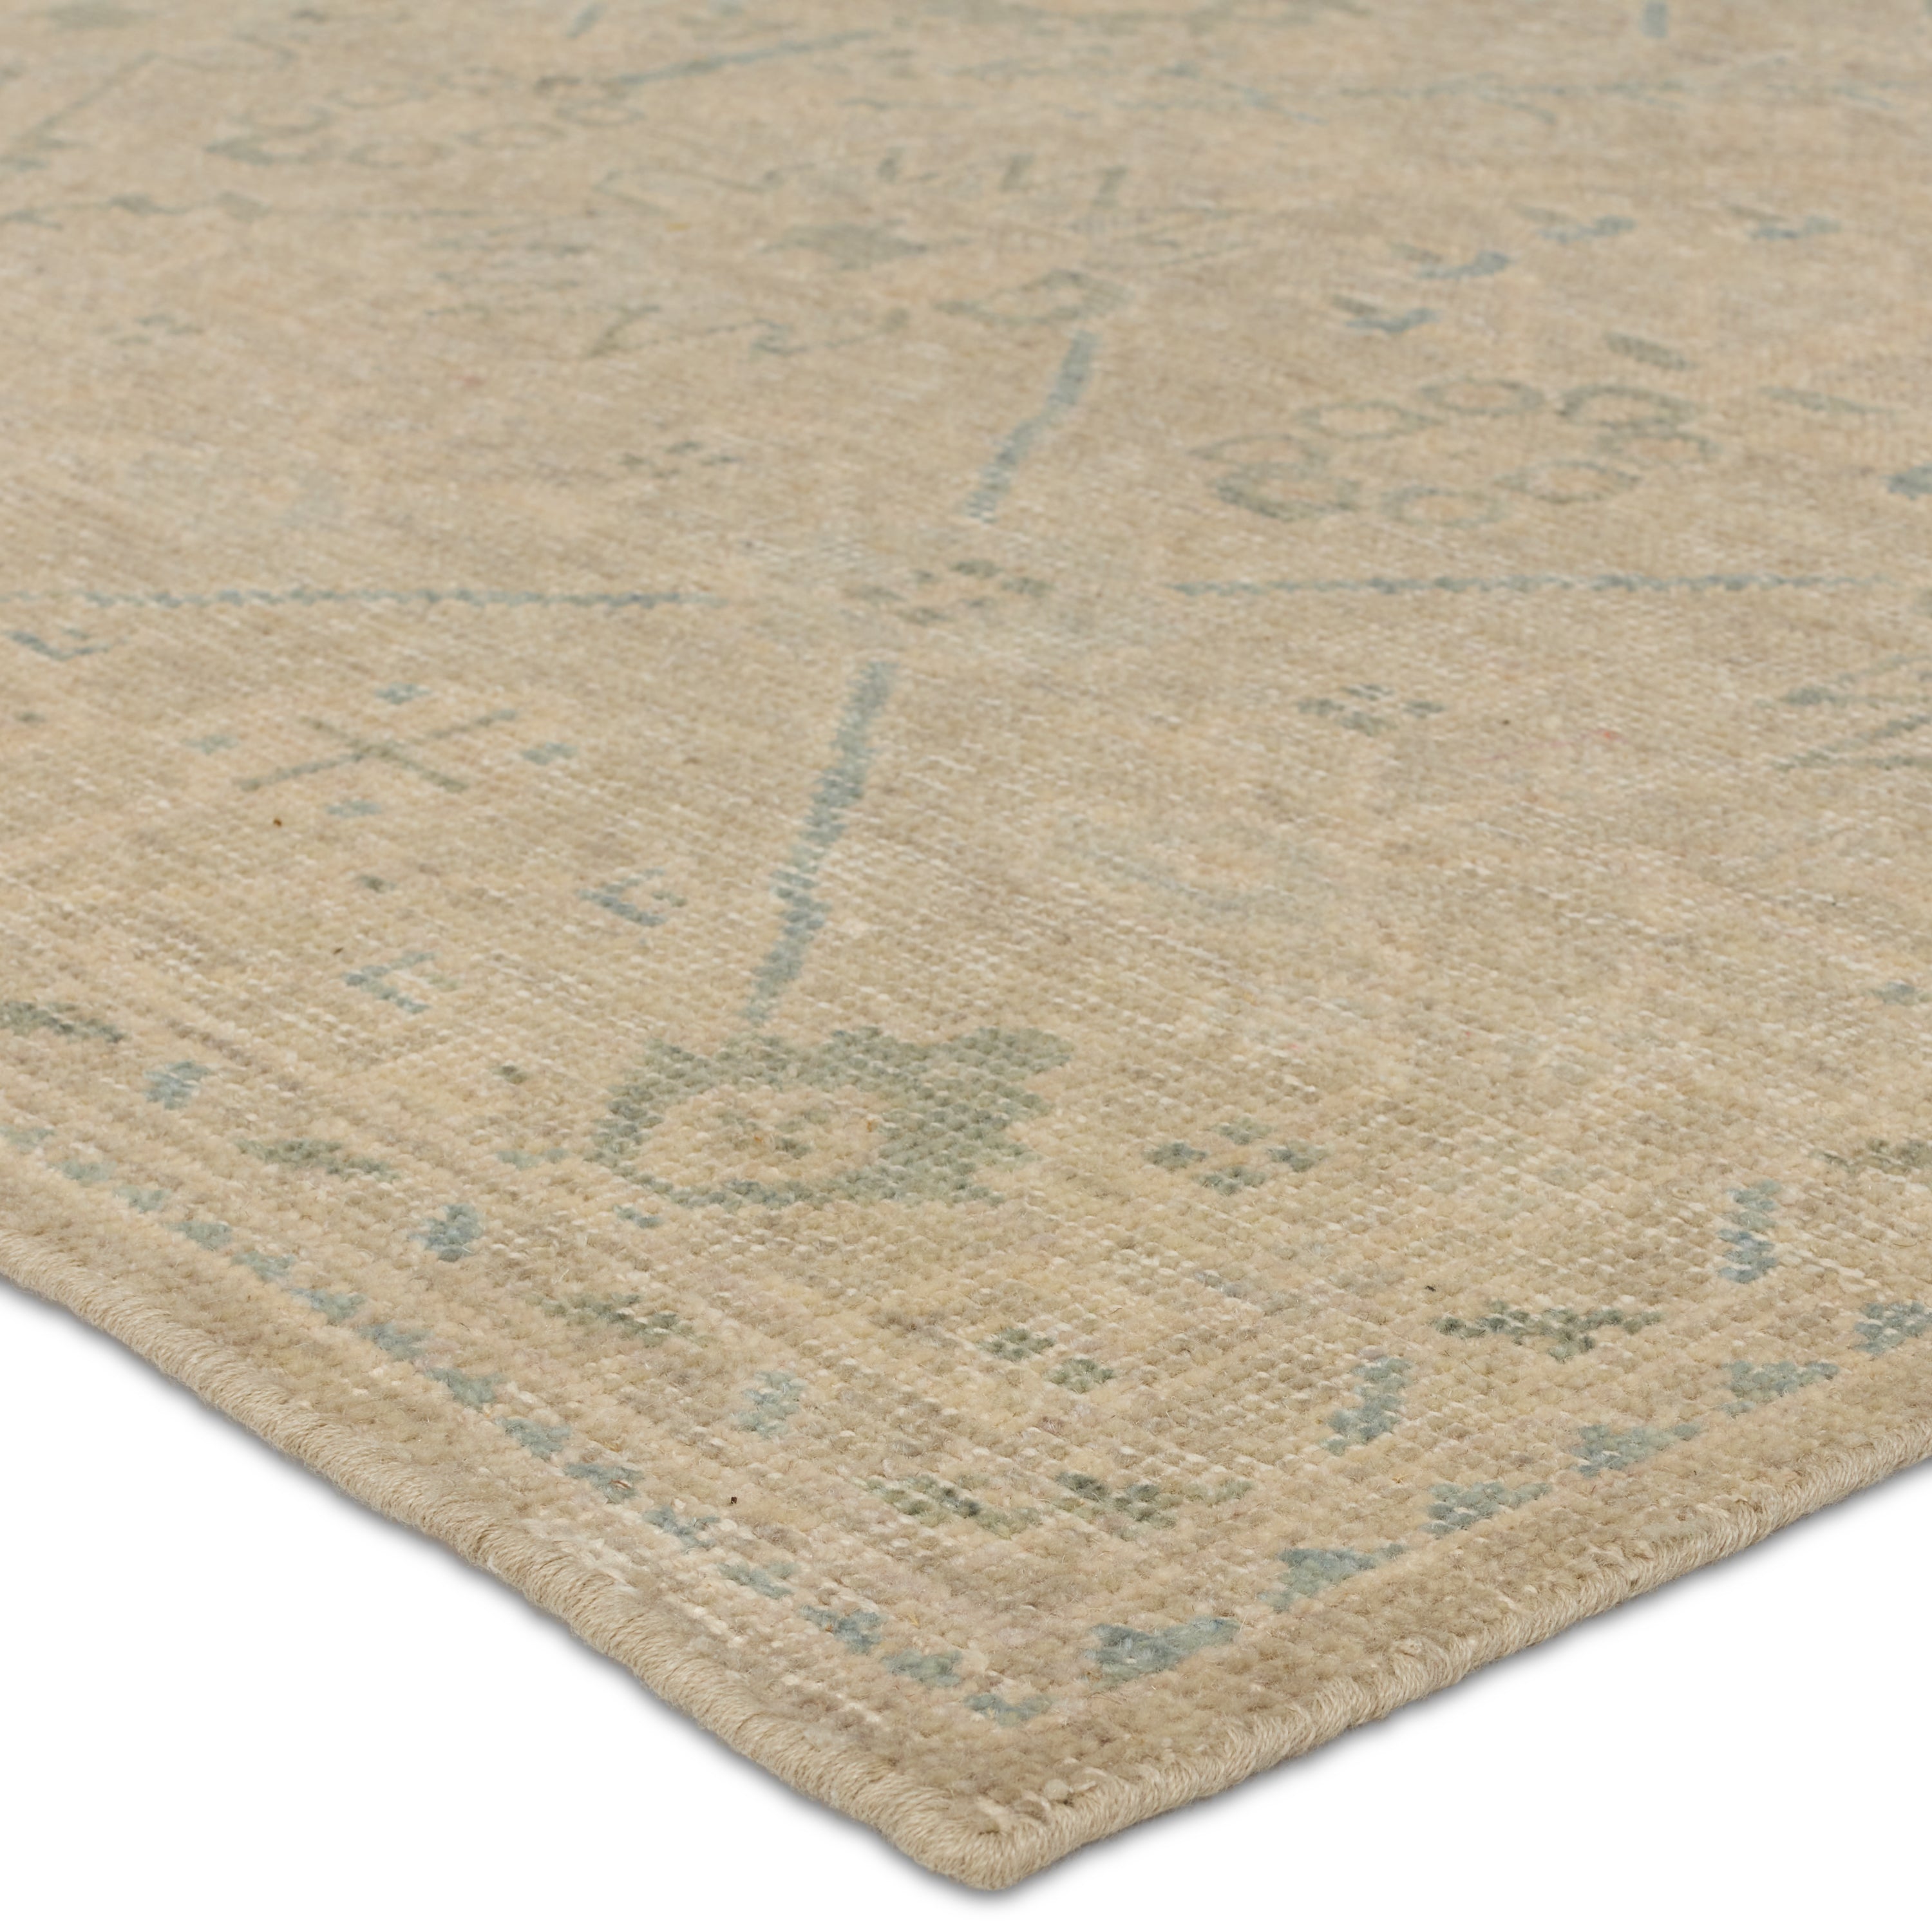 The Onessa collection marries traditional motifs with soft, subdued colorways for the perfect blend of fresh and time-honored style. These hand-knotted wool rugs feature a hand-sheared quality that lends the design a coveted vintage impression. The Joan rug features a distressed, floral Oushak pattern in hues of tan, blue, taupe, cream, and gray. Amethyst Home provides interior design, new construction, custom furniture, and area rugs in the Nashville metro area.